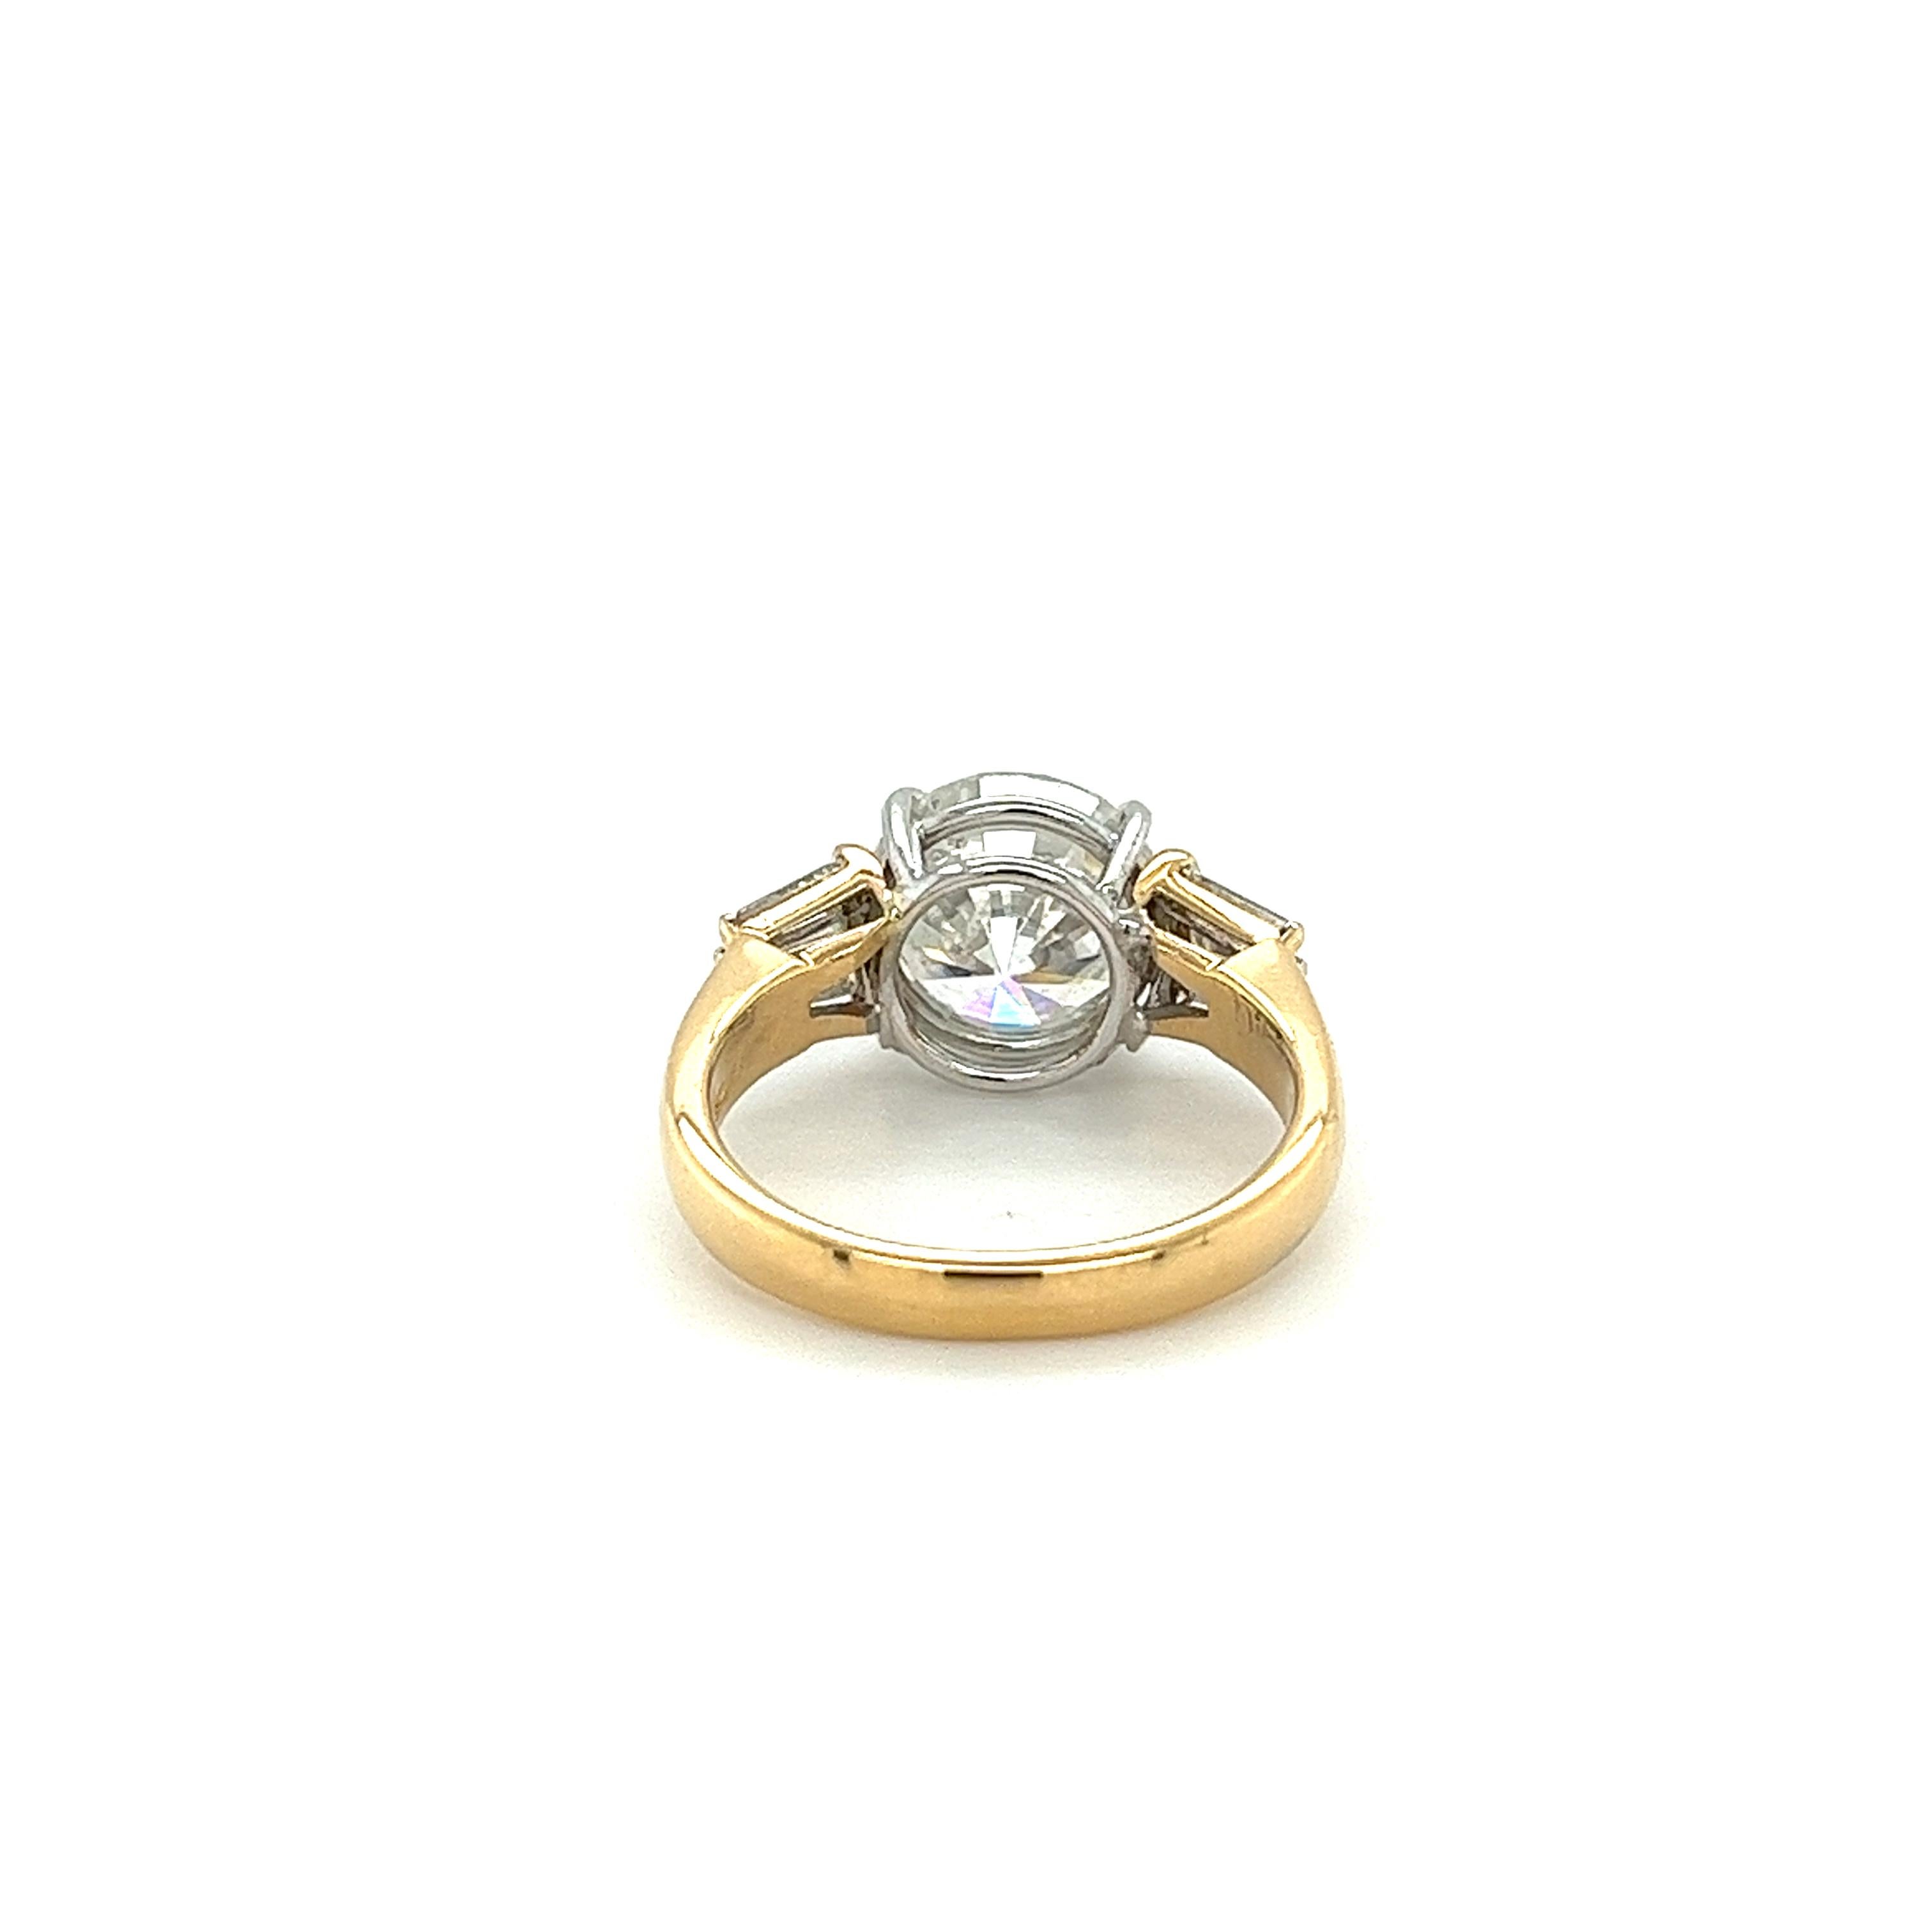 4.21 Carat Round Cut Diamond Engagement Ring With Baguettes in 2 Tone 18k Gold  For Sale 2